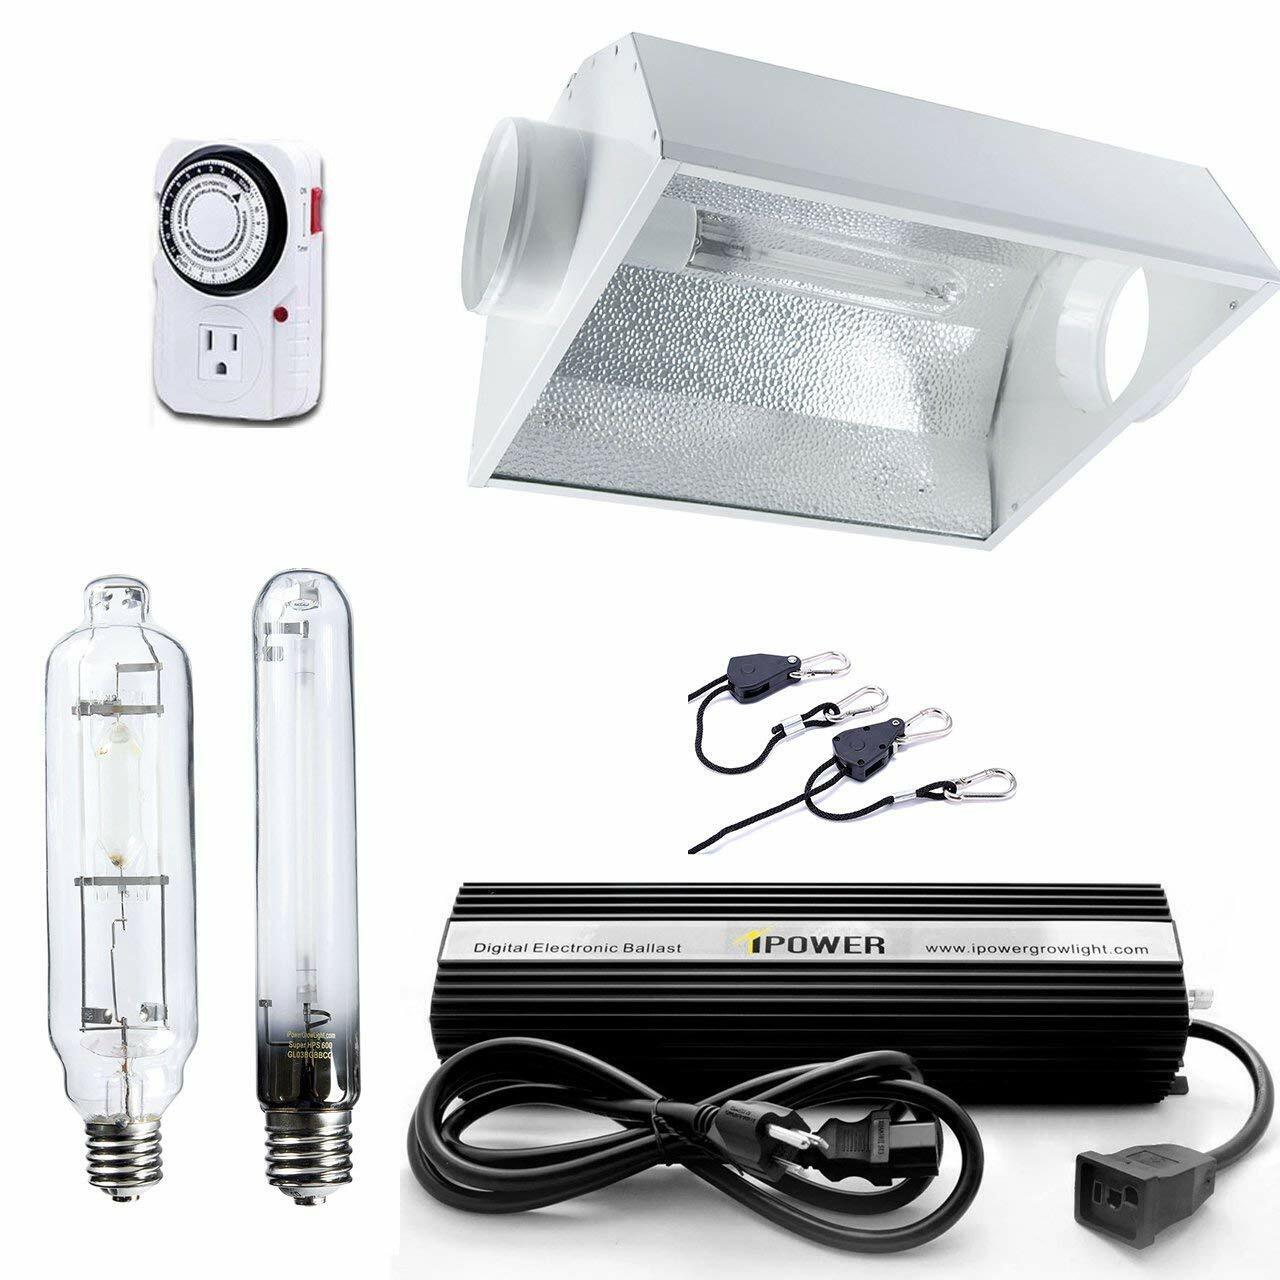 iPower 600W HPS MH Dimmable Grow Light System Kits Air Cooled Reflector Hood Set